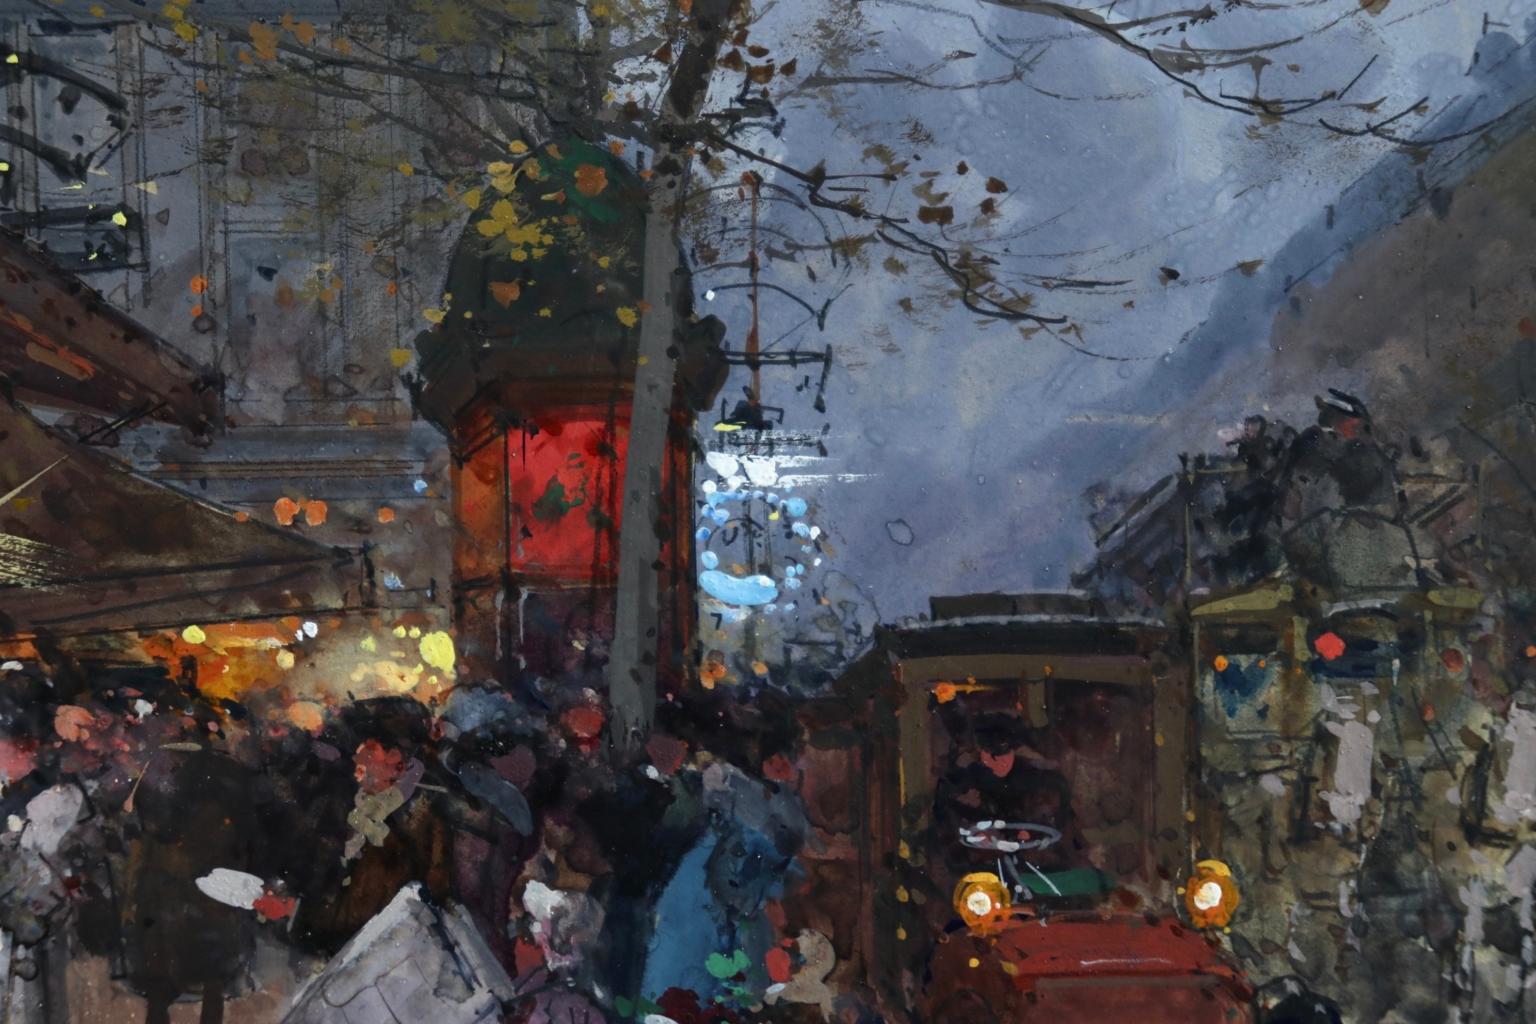 A beautiful gouache on board circa 1890 by French impressionist painter Eugene Galien-Laloue depicting a bustling night scene at the Café de la Paix, a famous café at the Place de l'Opera, Paris. Signed lower left. This work has been authenticated